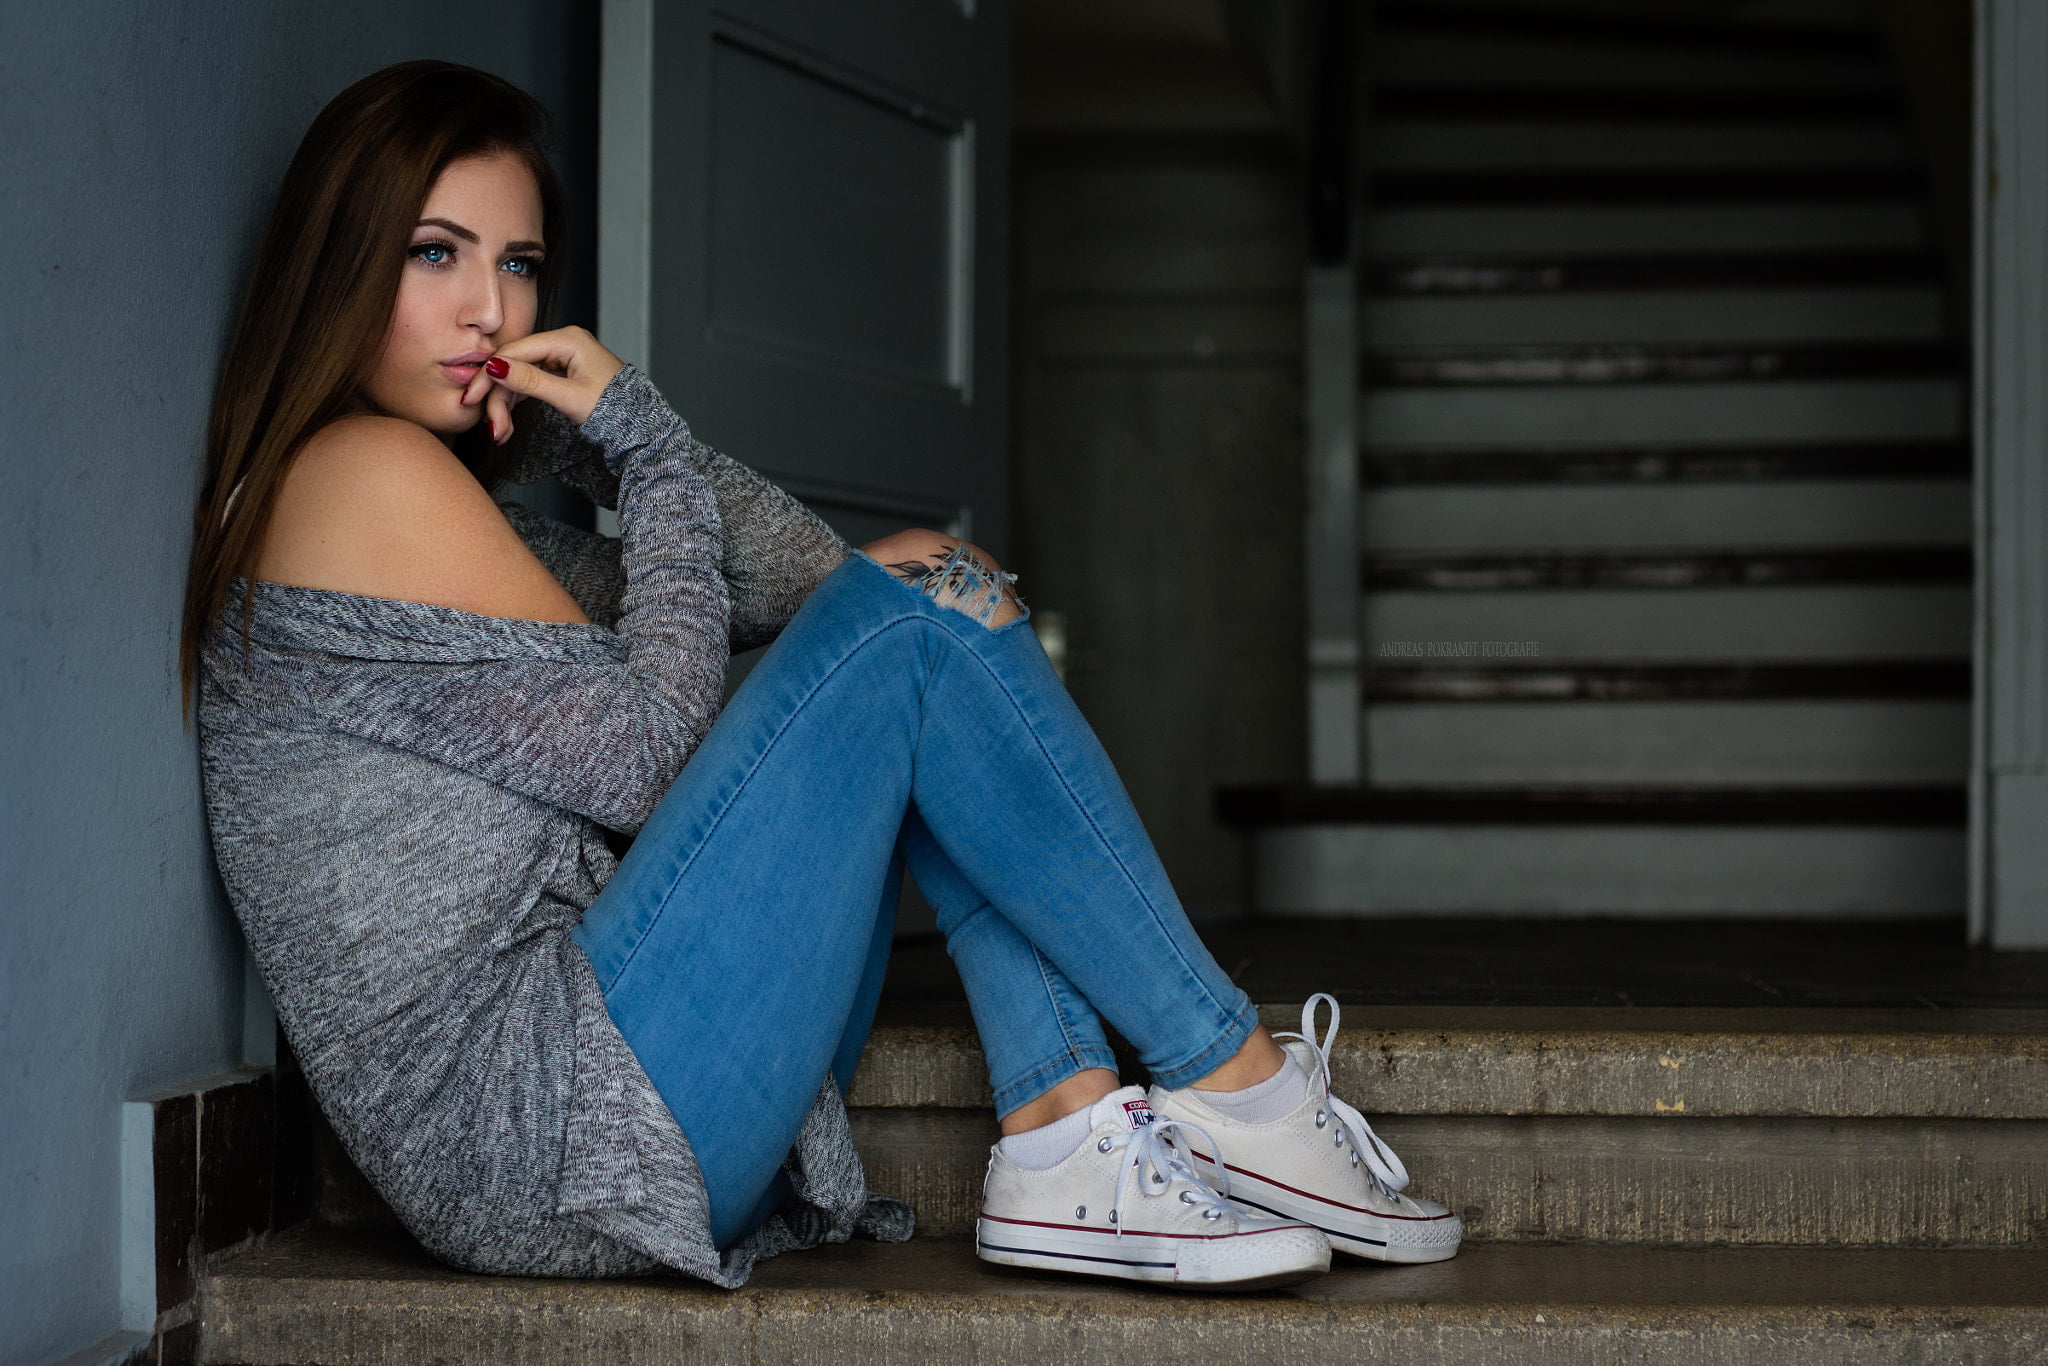 women, blue eyes, Converse, torn jeans, red nails, sitting